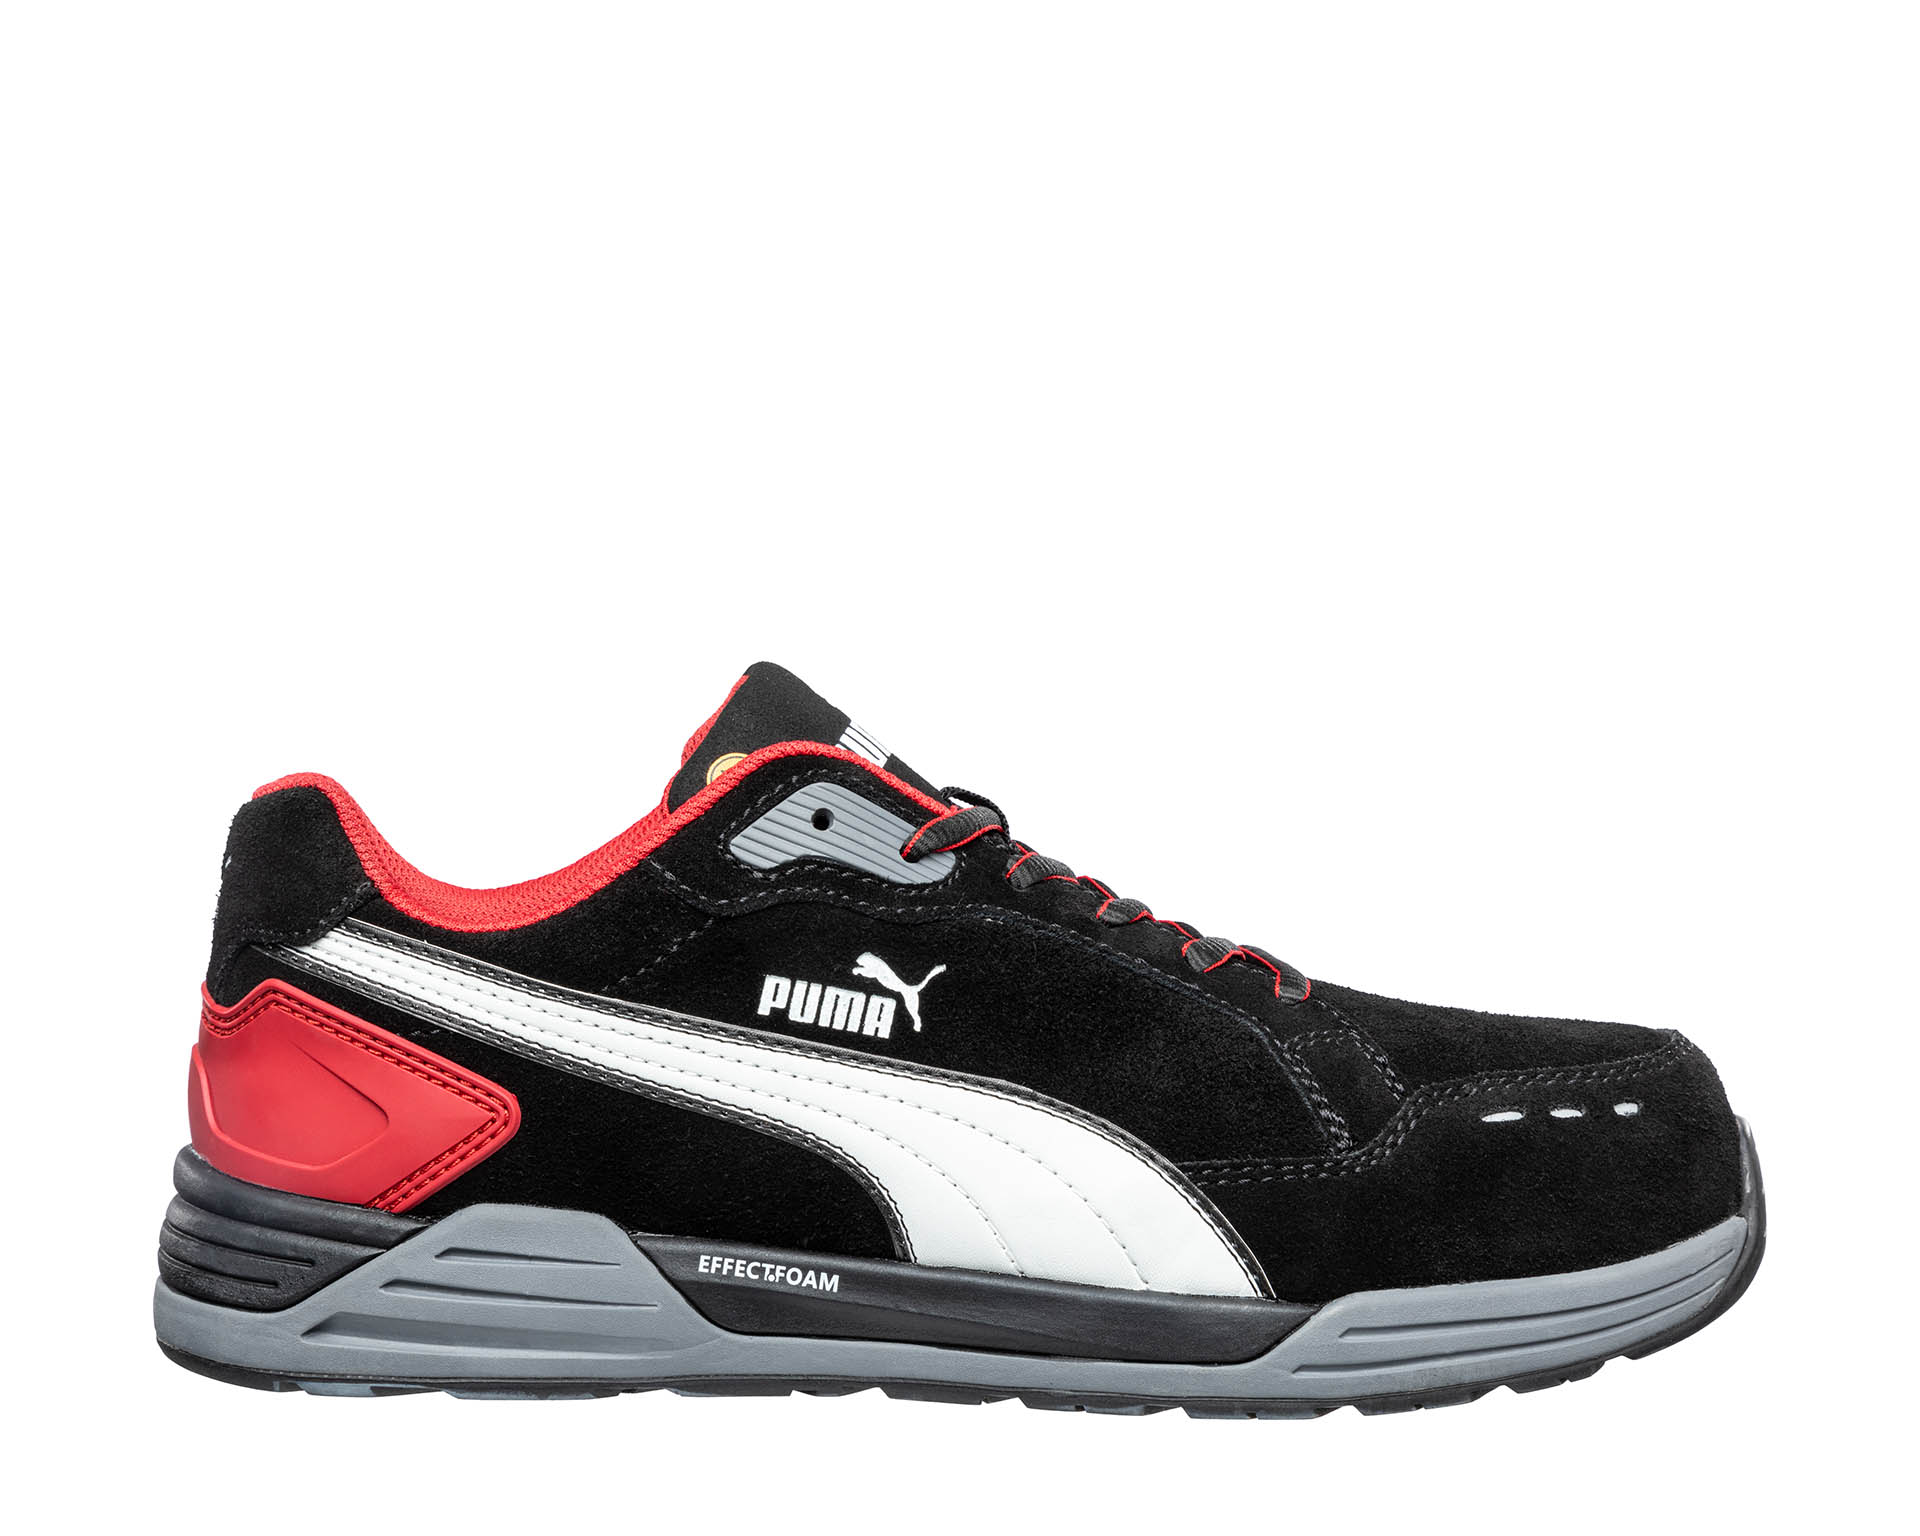 PUMA SAFETY safety English S3 ESD AIRTWIST | HRO Puma BLK/RED LOW SRC Safety shoes